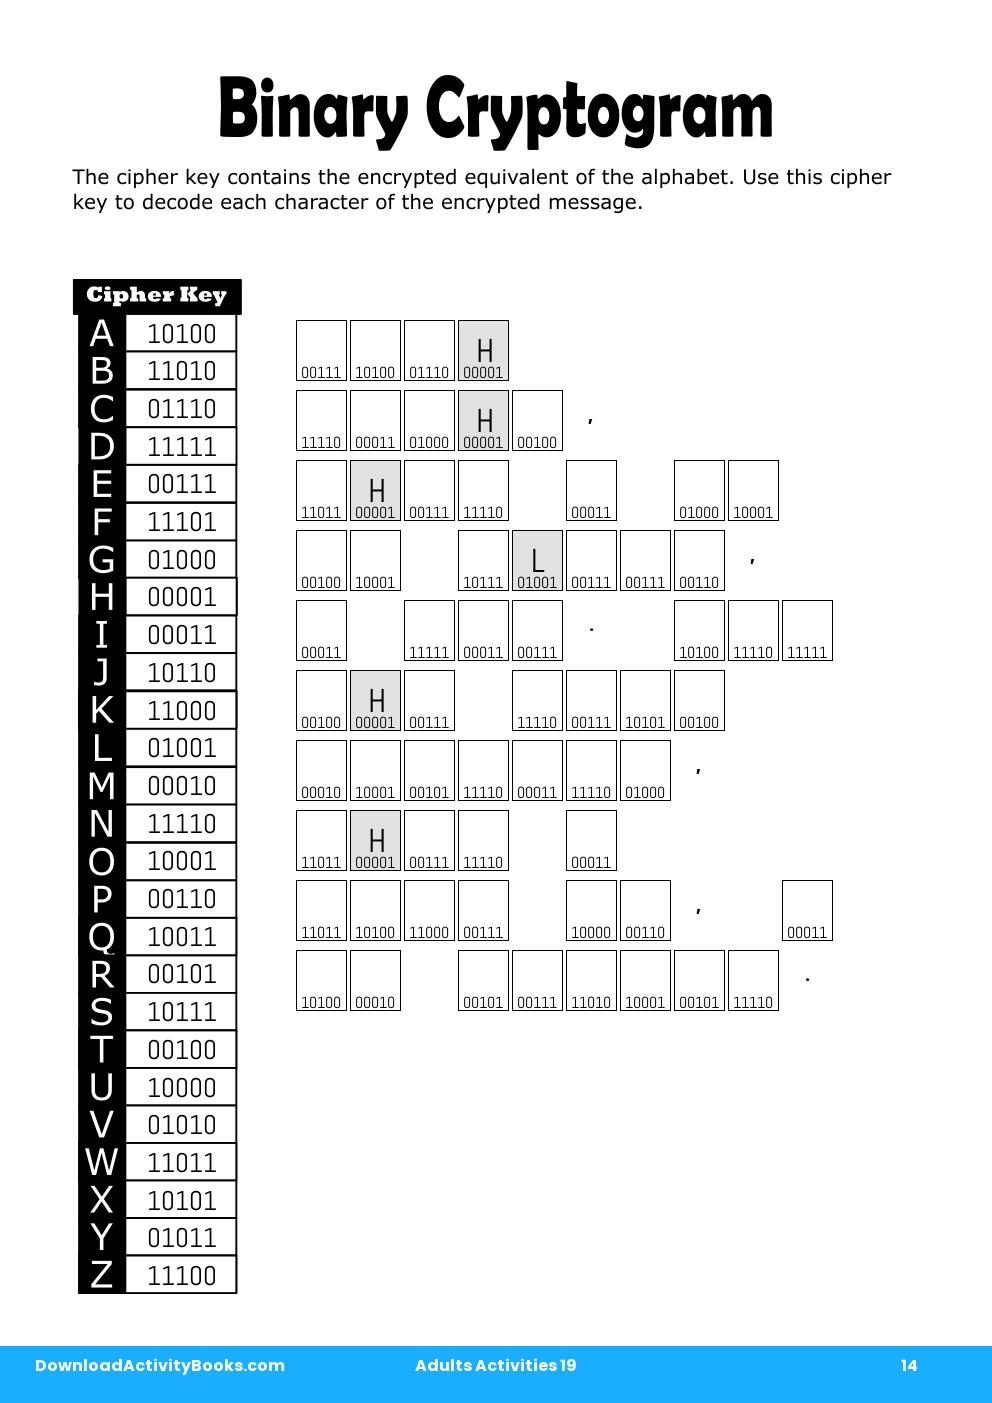 Binary Cryptogram in Adults Activities 19